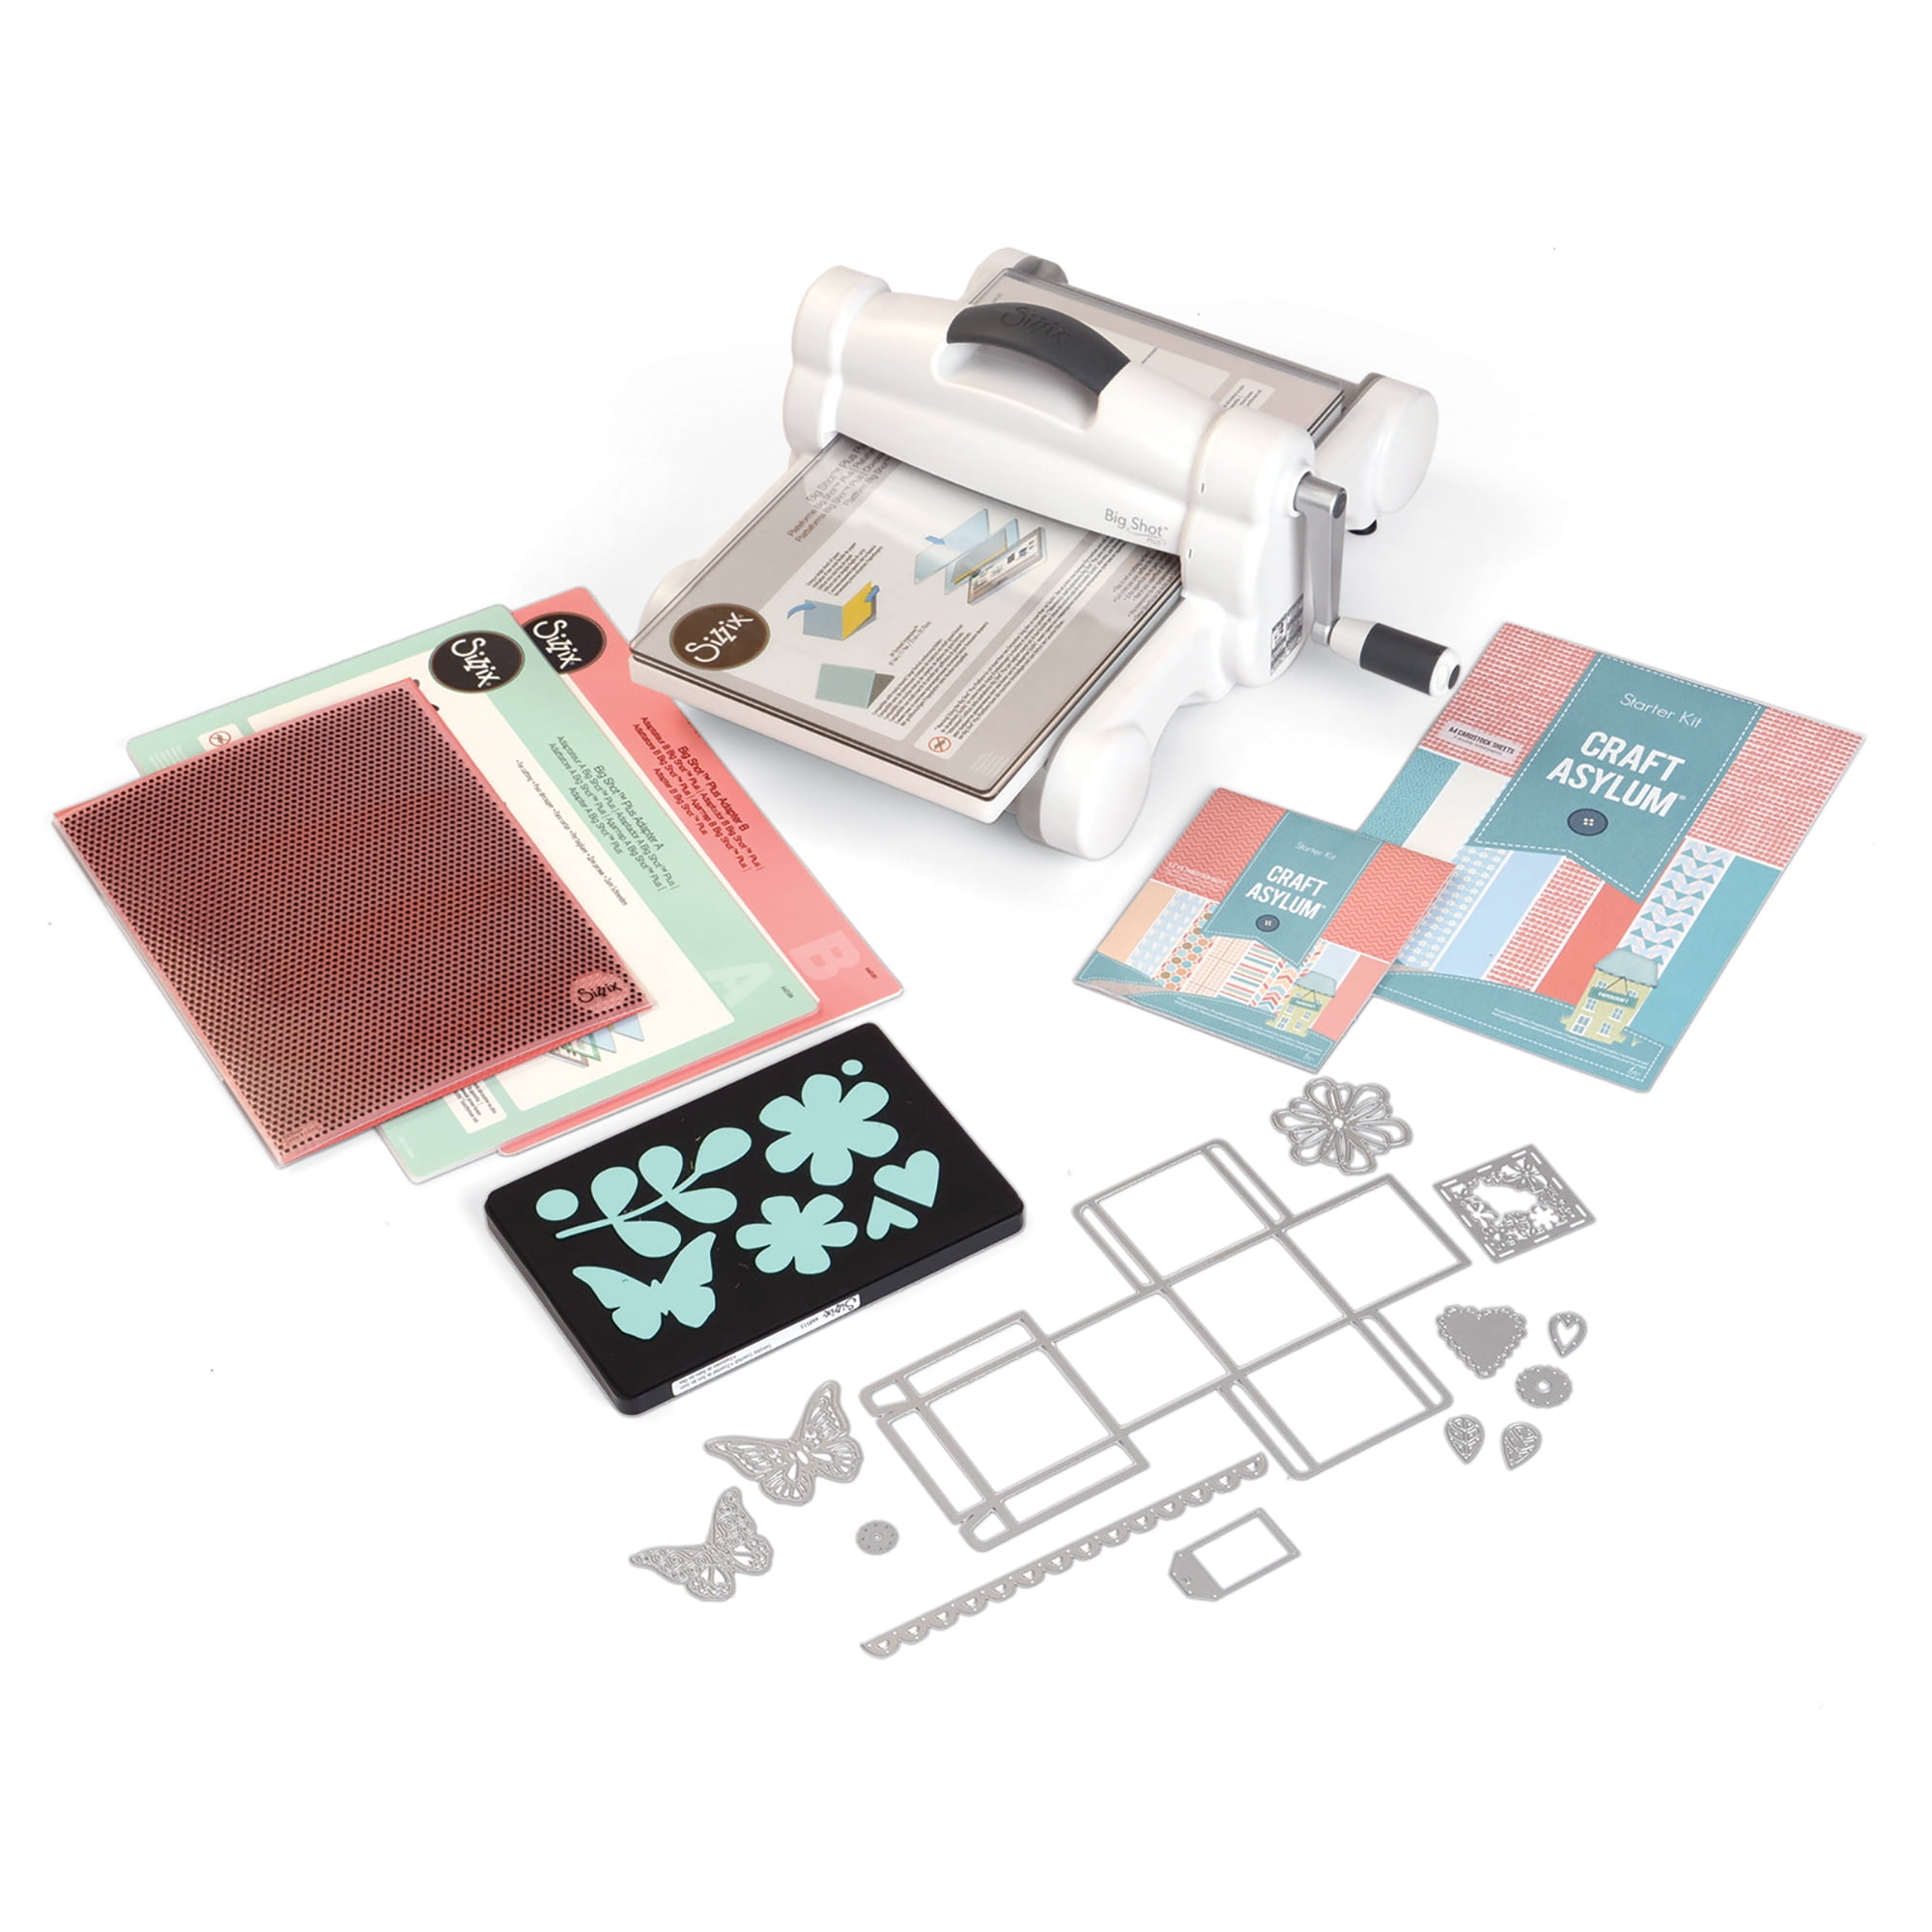 Sizzix Big Shot Switch Plus Starter Kit (White), Electric Die Cutting &  Embossing Machine For Arts & Crafts, Card Making, Scrapbooking & Papercraft